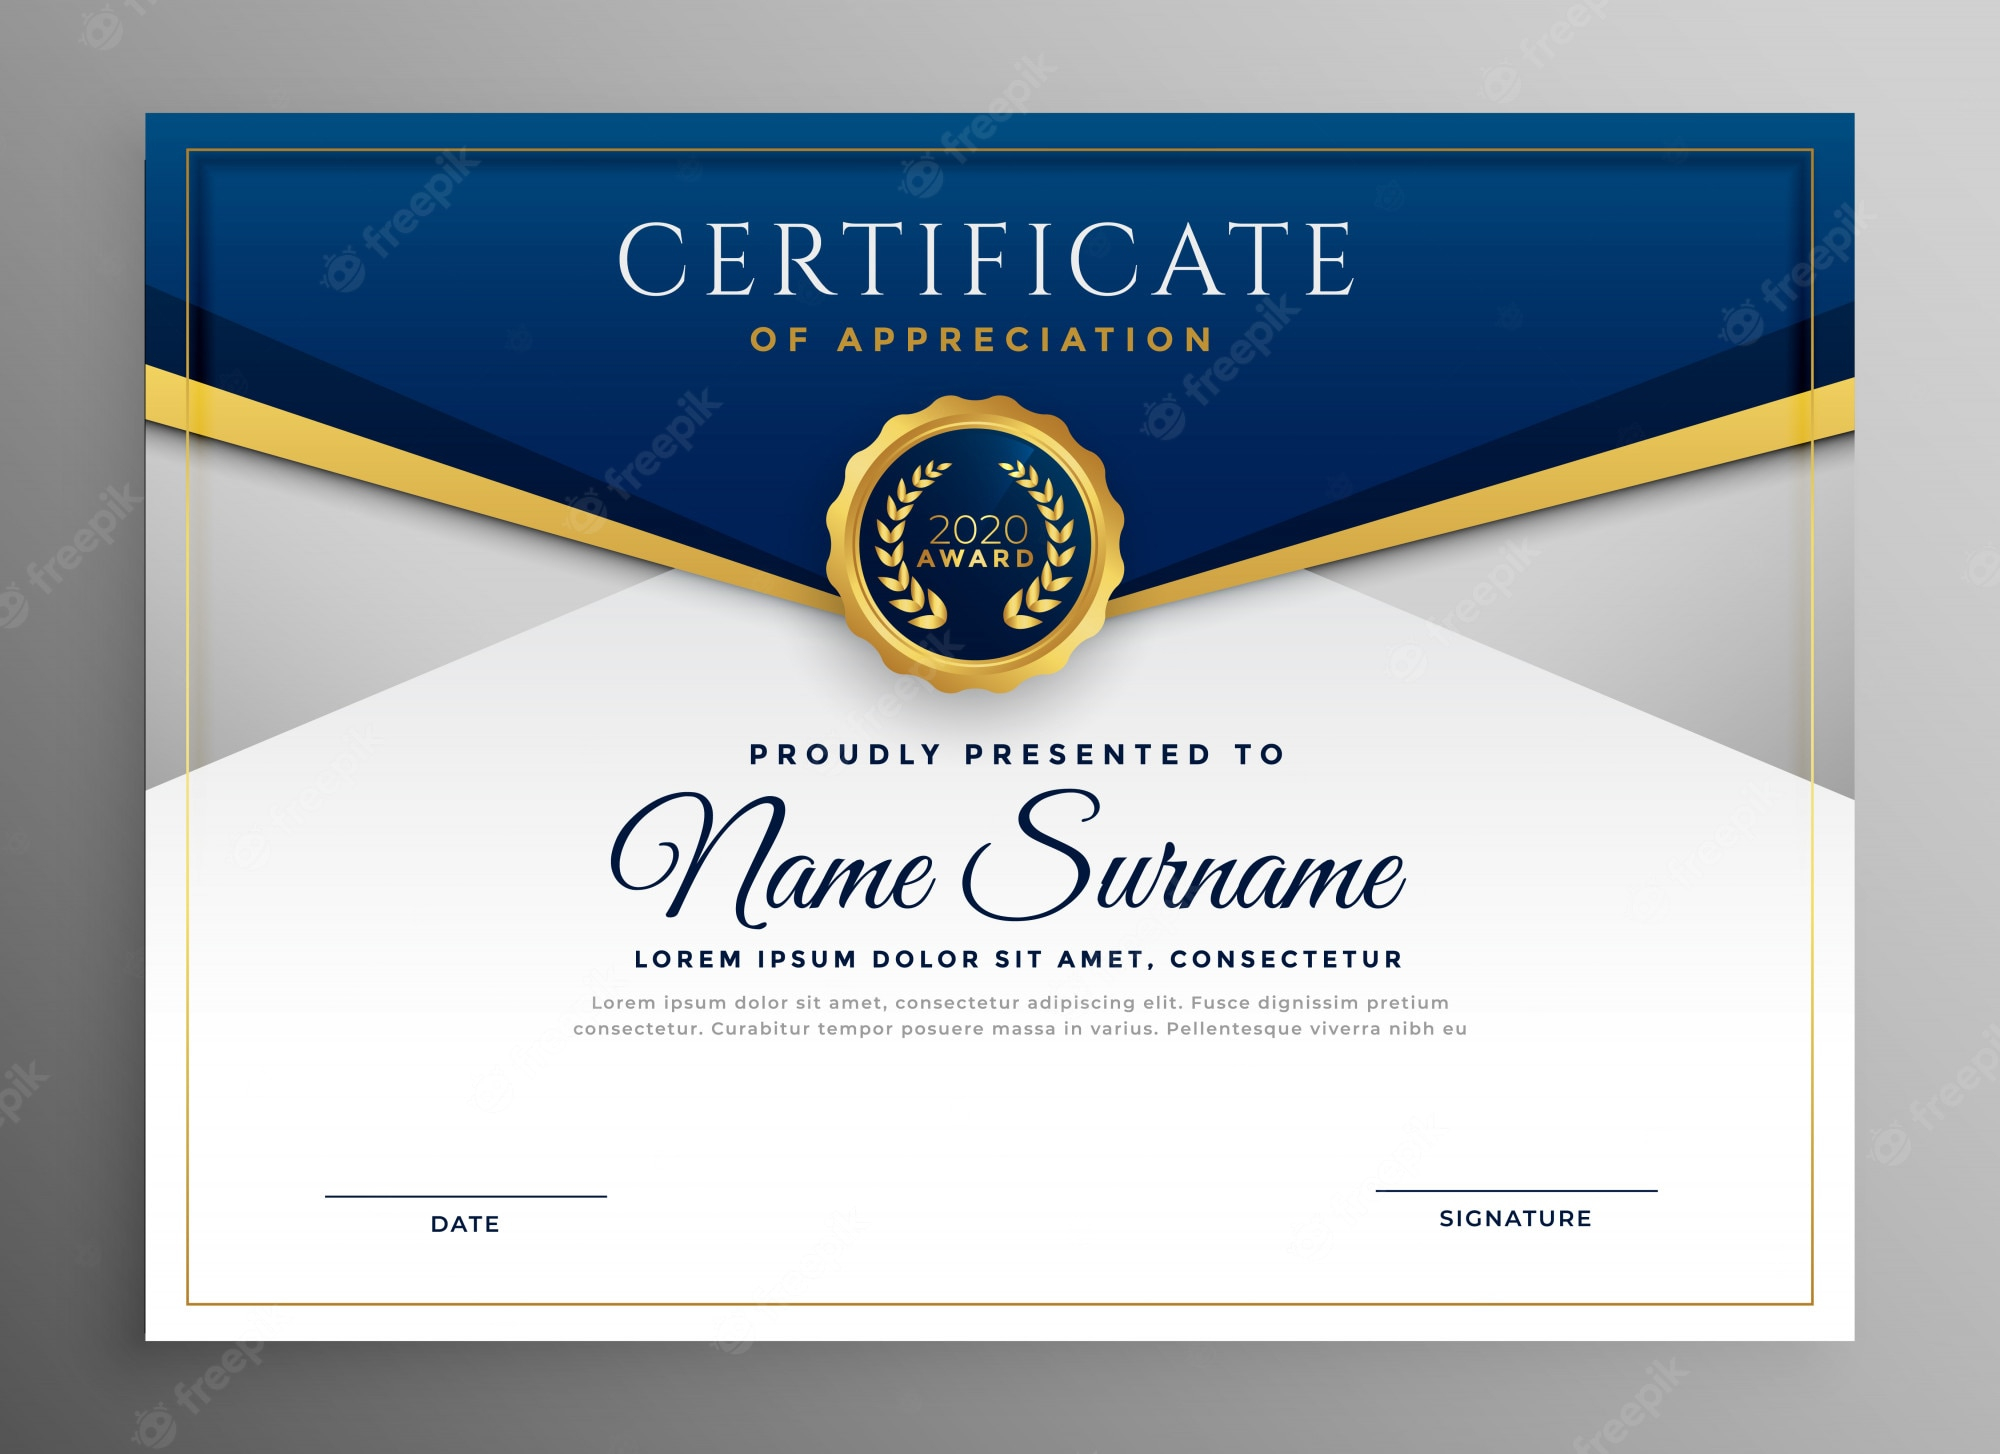 Certificate of recognition Images  Free Vectors, Stock Photos & PSD Pertaining To Printable Certificate Of Recognition Templates Free